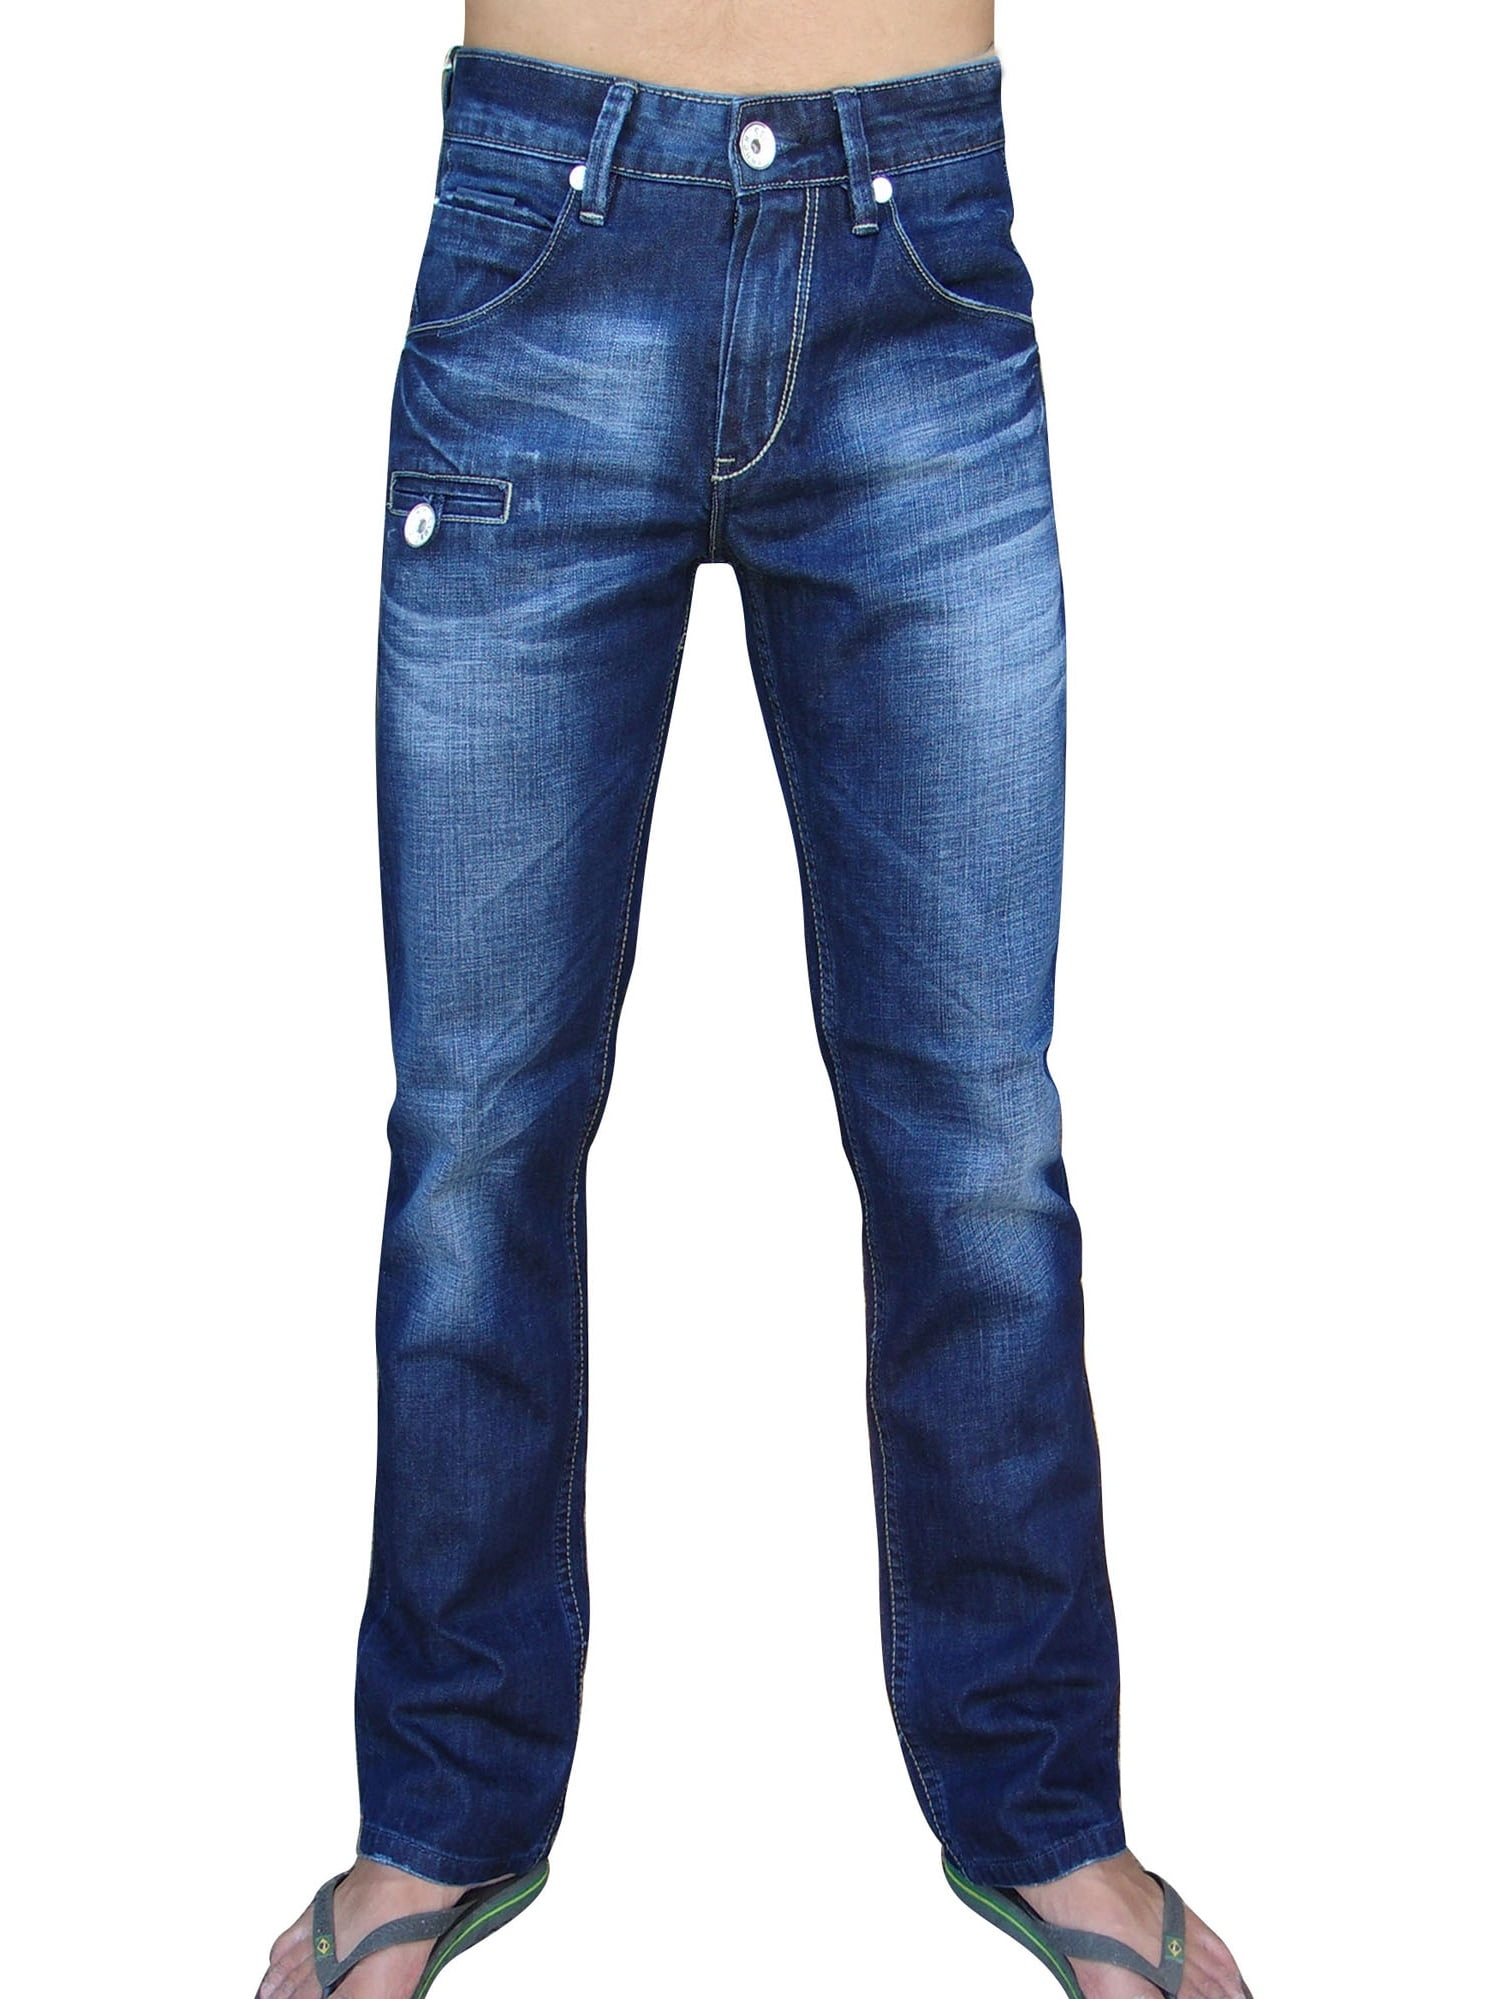 Stone Touch Jeans - StoneTouch Men's Regular Fit Jeans 306-36s ...